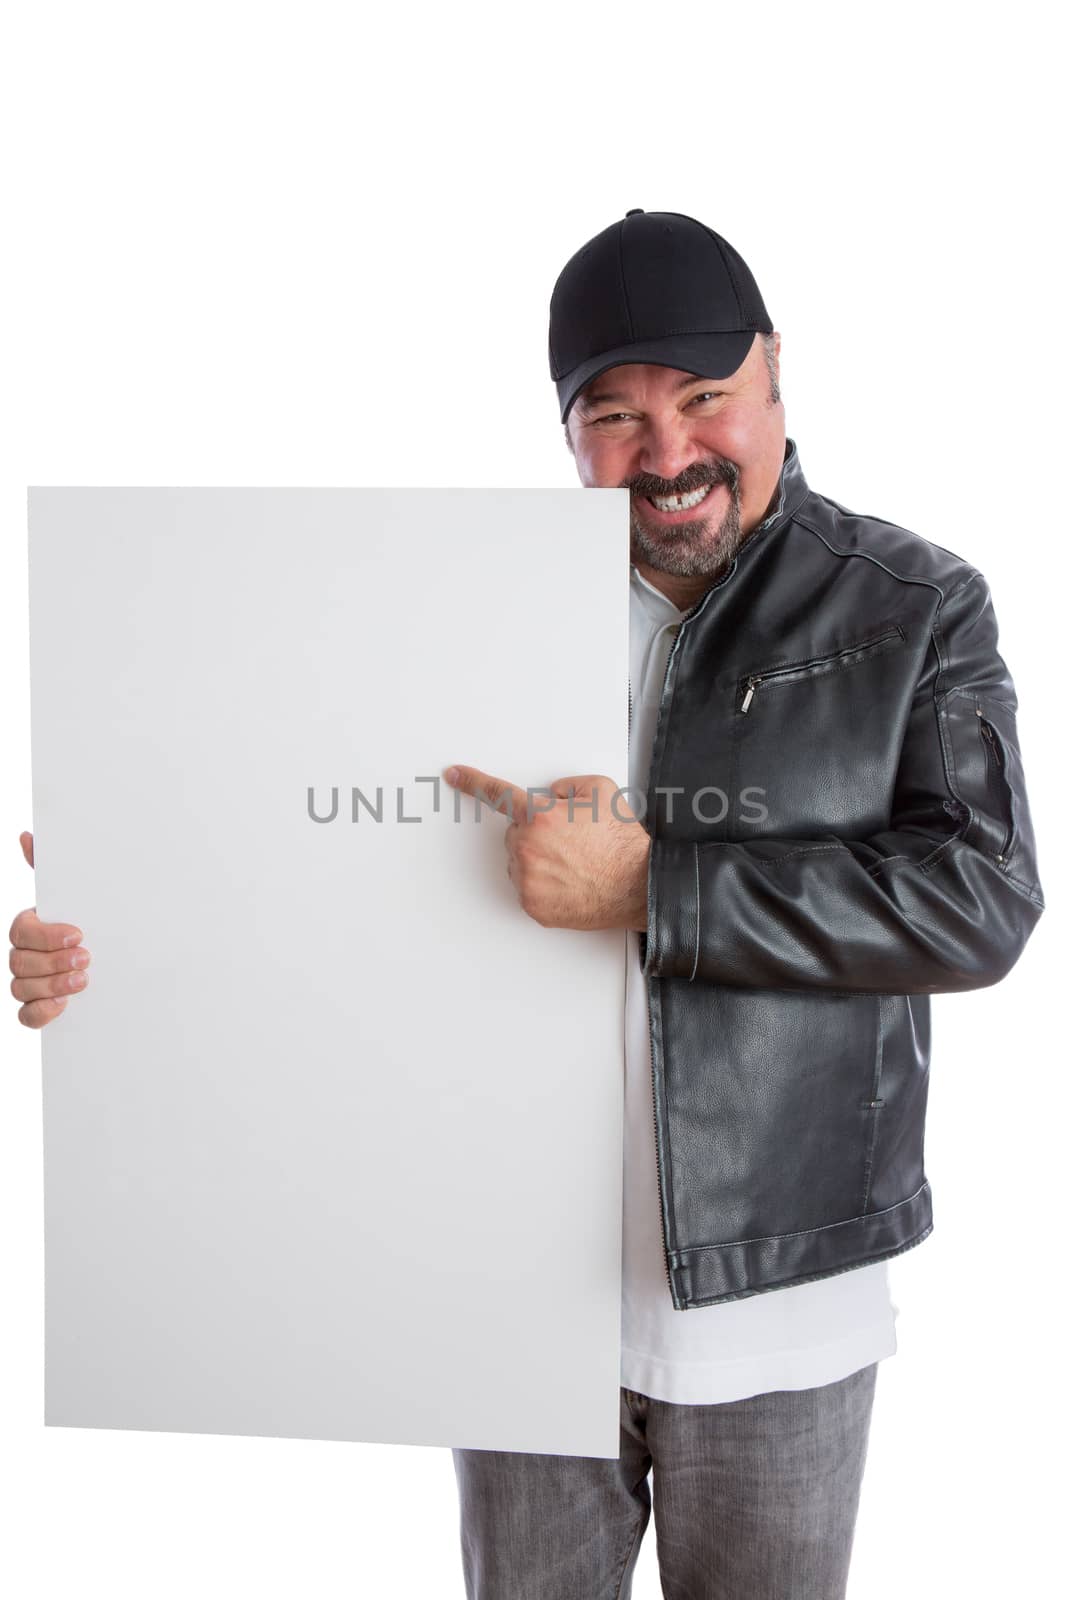 Charismatic trendy middle-aged man in a leather jacket and cap pointing to a blank white sign he is holding with a beaming smile as he promotes your product, isolated on white